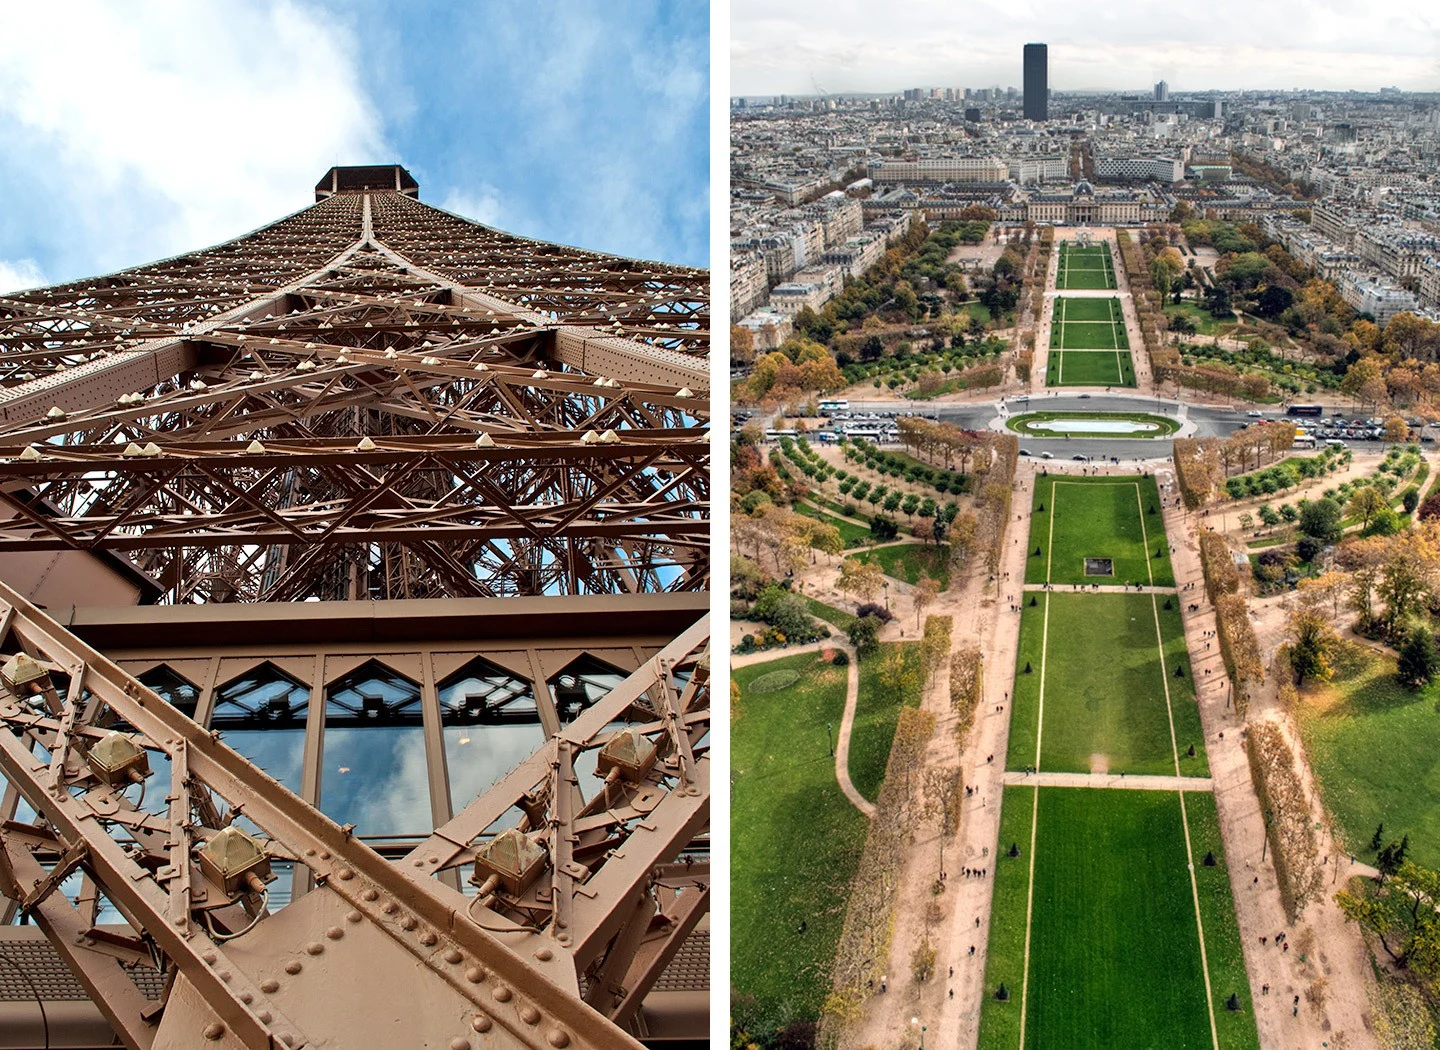 Views from the second floor of the Eiffel Tower in Paris